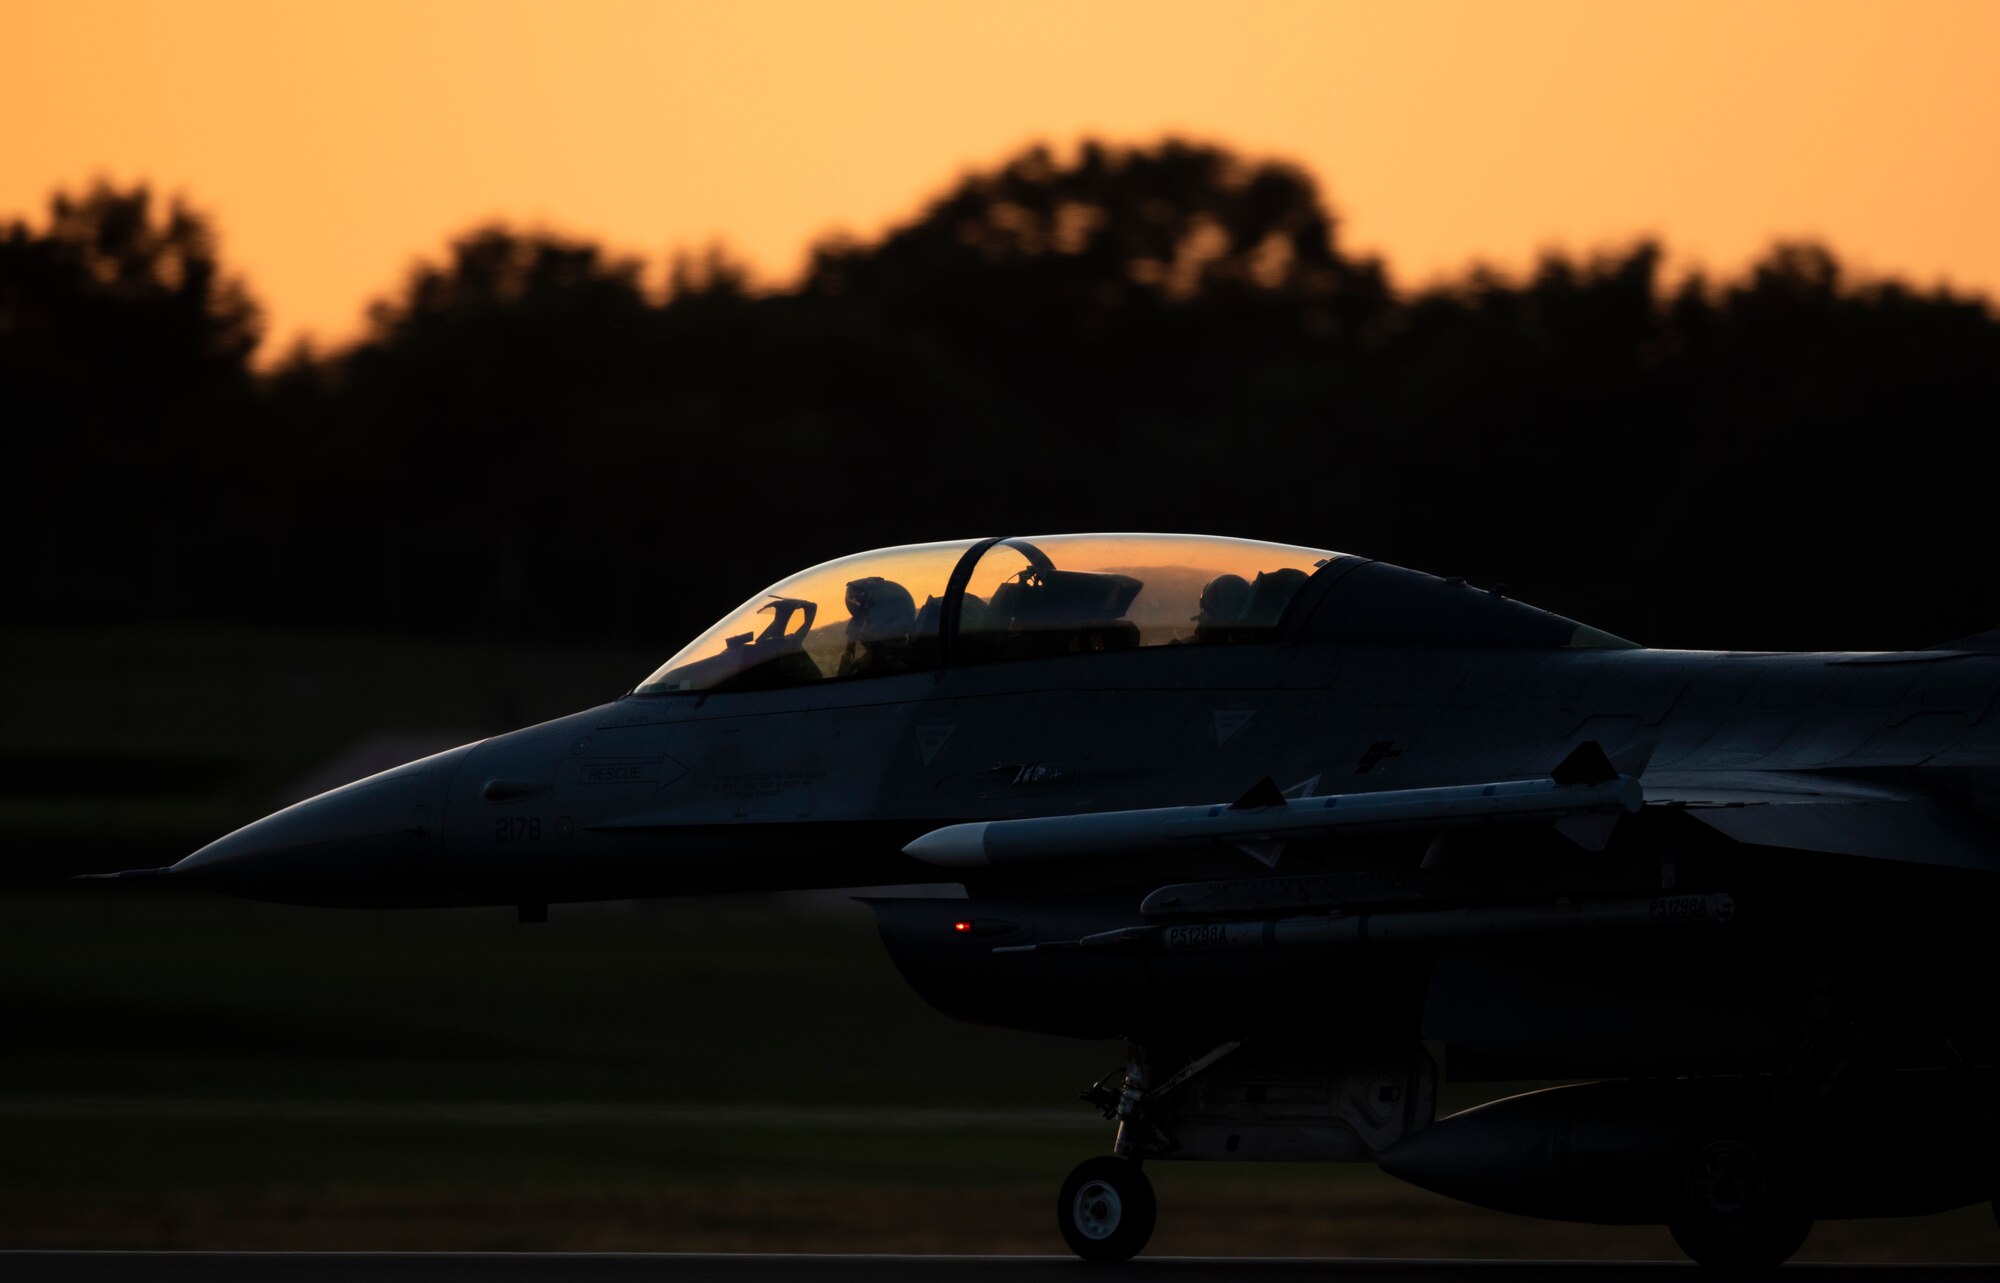 An F-16 Fighting Falcon, assigned to the 510th Fighter Squadron, Aviano Air Base, Italy, lands at Royal Air Force Lakenheath, England, Sept. 9, 2020. The 510th FS is conducting close air support training with the 321st Special Tactics Squadron, the 19th Regiment Royal Artillery and the 2nd Air Support Operations Squadron to improve combat capabilities and interoperability between allied nations. (U.S. Air Force photo by Airman 1st Class Jessi Monte)